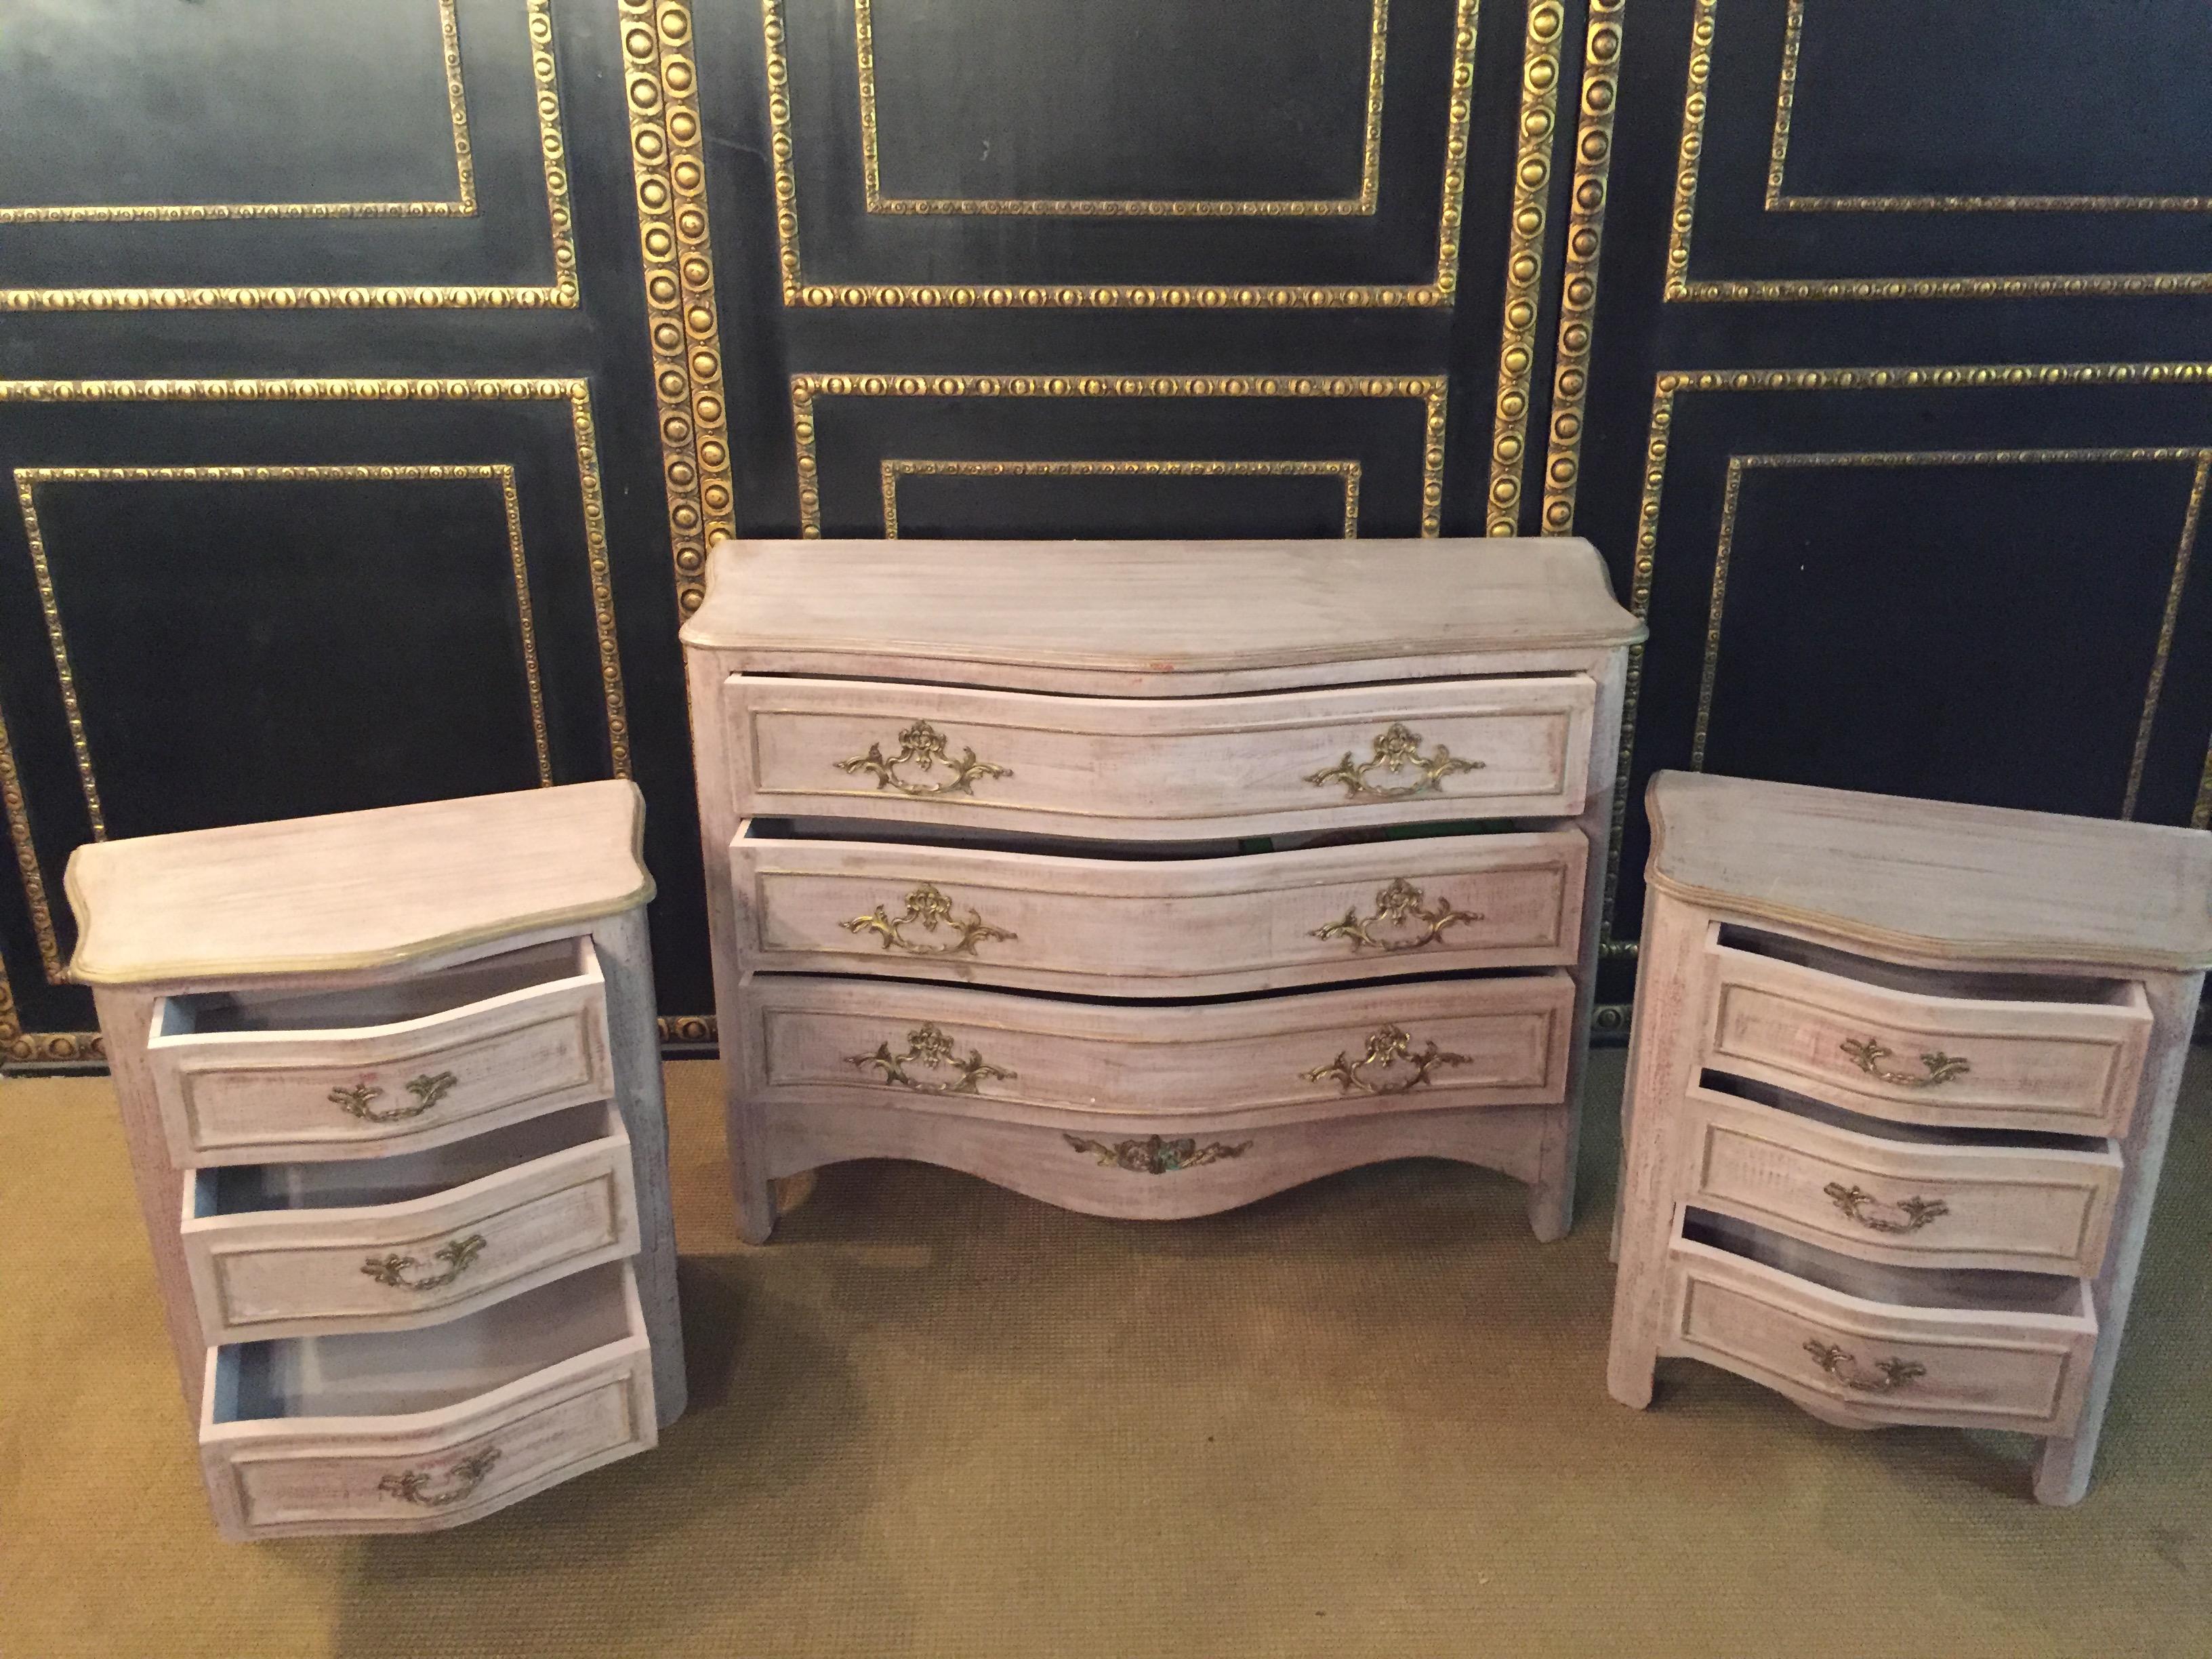 Beech Beautiful Country Style Baroque Chest of Drawers in the Style of 18th Century